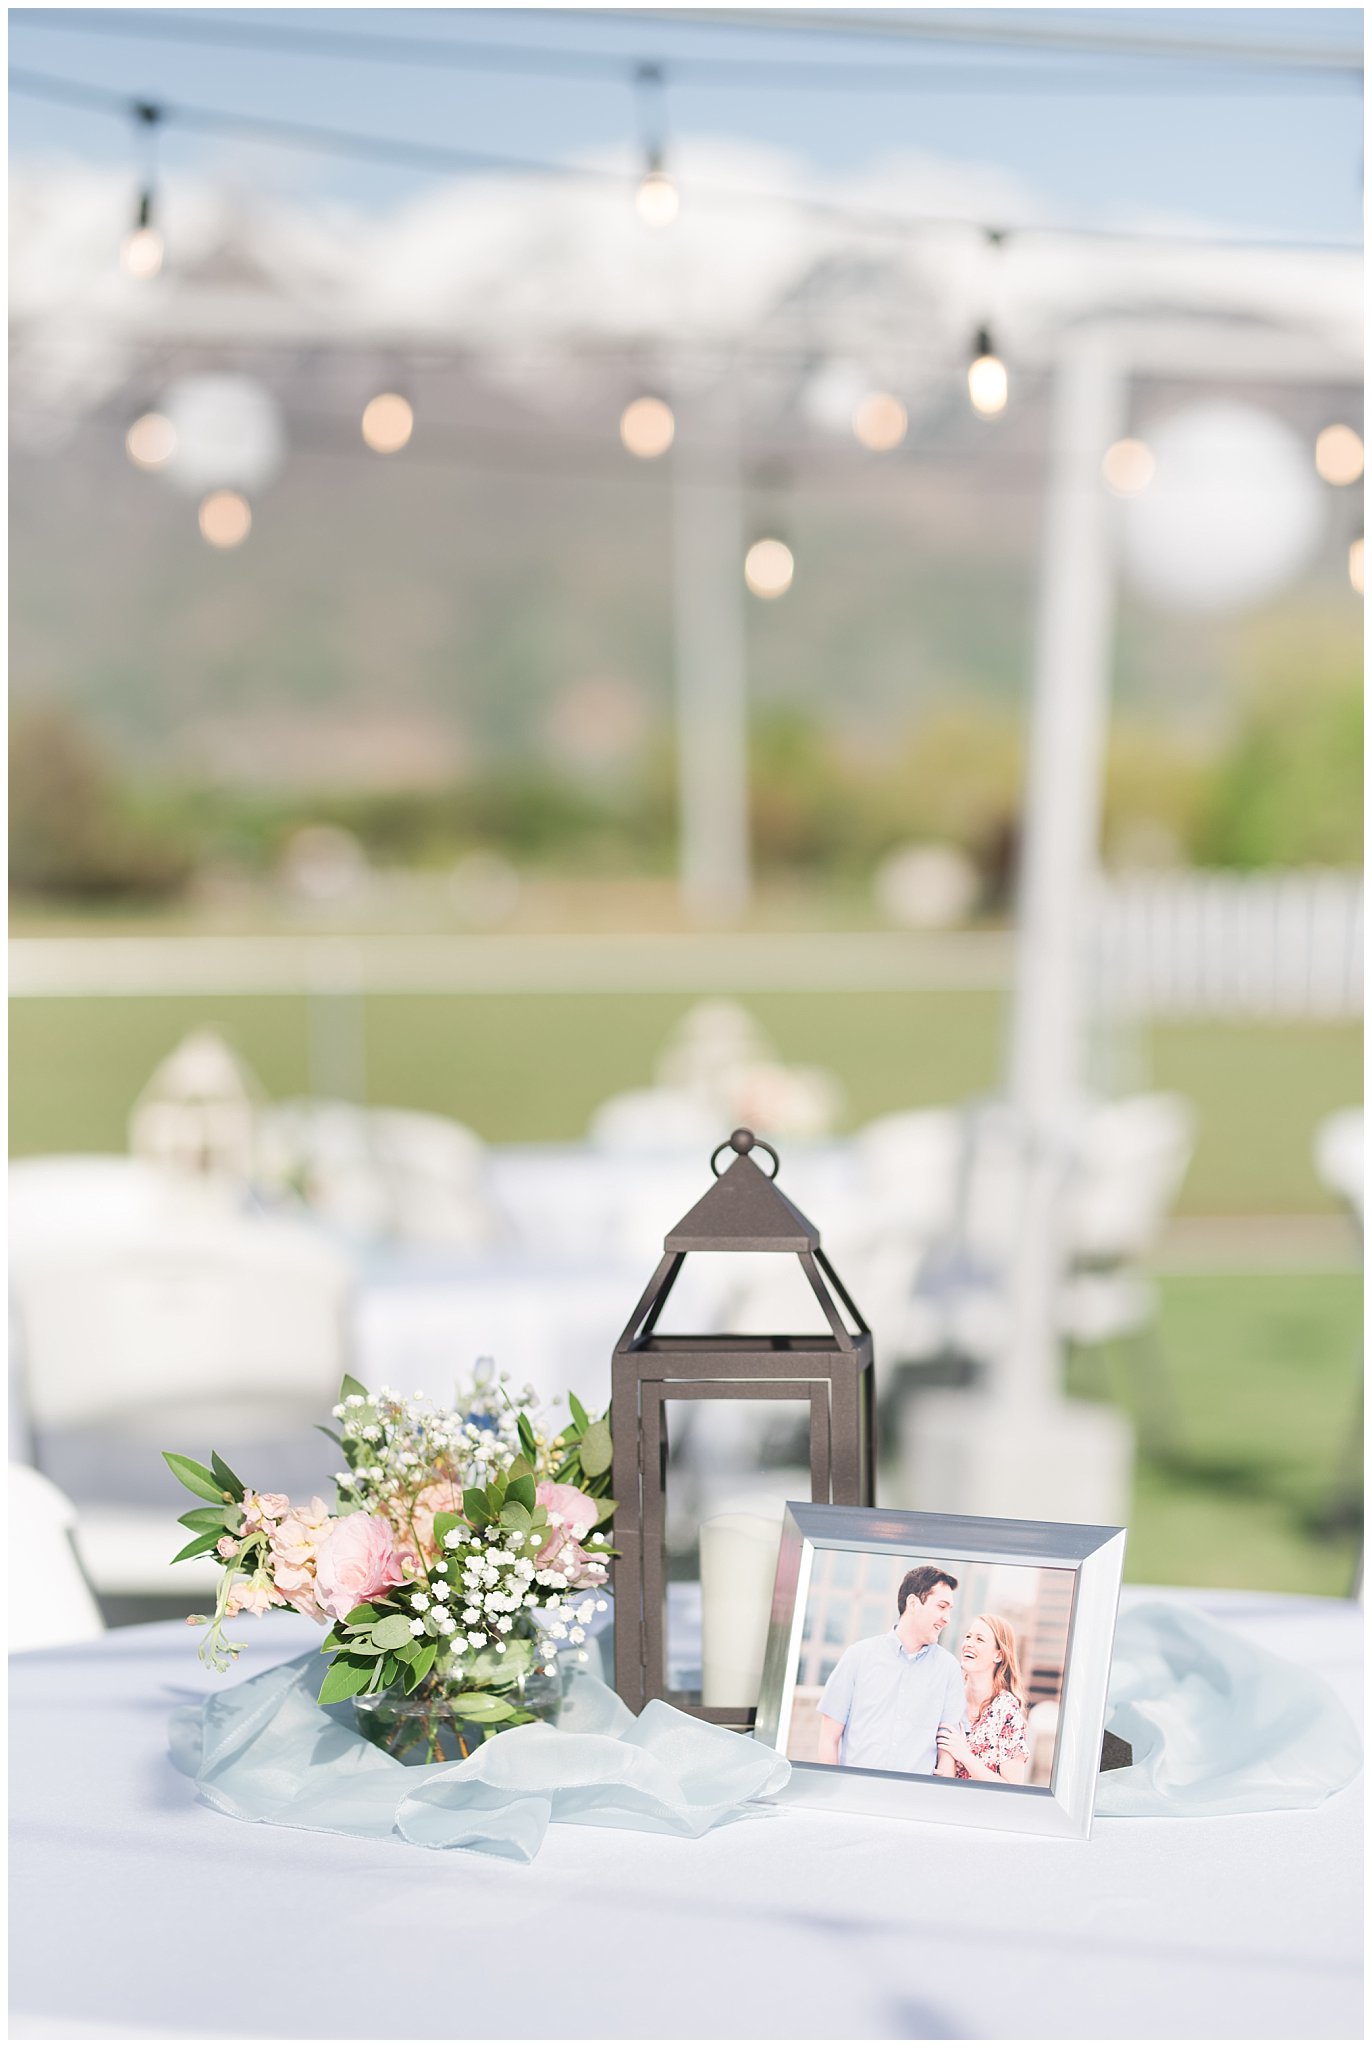 Lantern and flower table setup | Backyard outdoor spring wedding with grey, blush, and light blue wedding colors | Spring Provo City Center Temple Wedding | Utah Wedding Photographers | Jessie and Dallin Photography